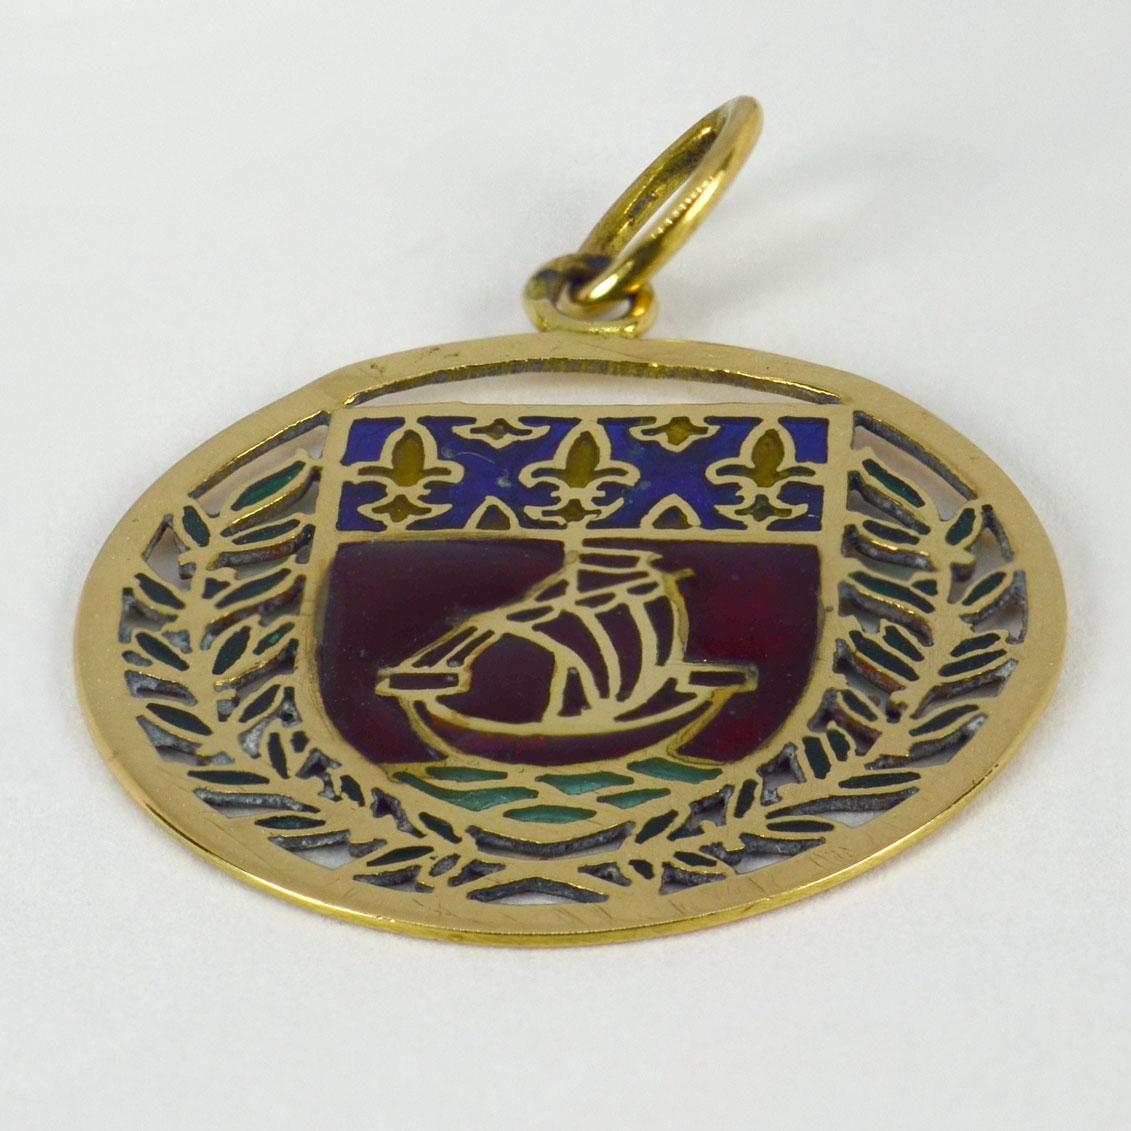 An 18 karat (18K) yellow gold charm pendant designed as a shield designed as the coat of arms for the City of Paris, depicting a yacht or boat in full sail surrounded by a laurel wreath, enhanced by plique-a-jour enamel work. Stamped with the